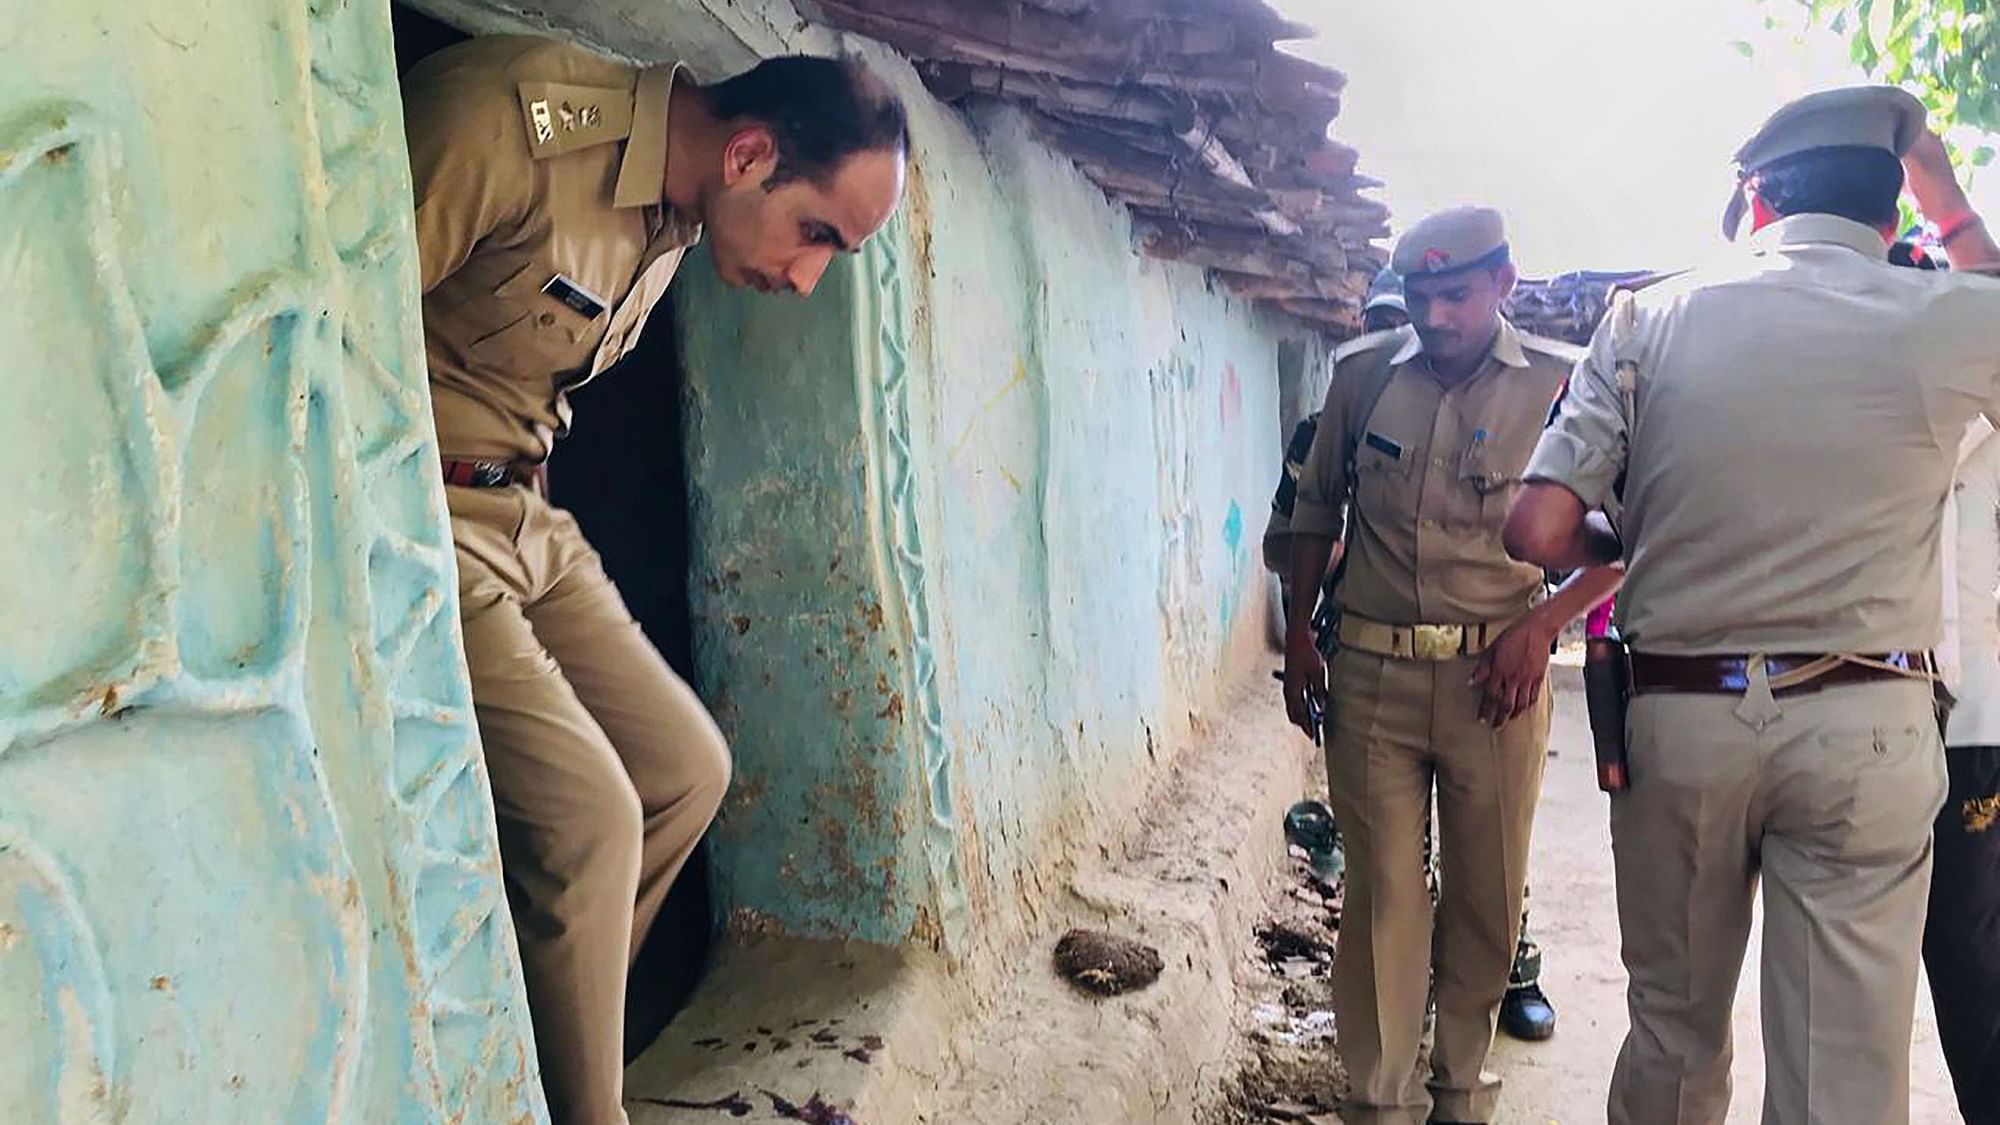 S P Salman Taj Patil visits the house of a victim killed over a property dispute, in Sonbhadra district, Wednesday, July 17, 2019.